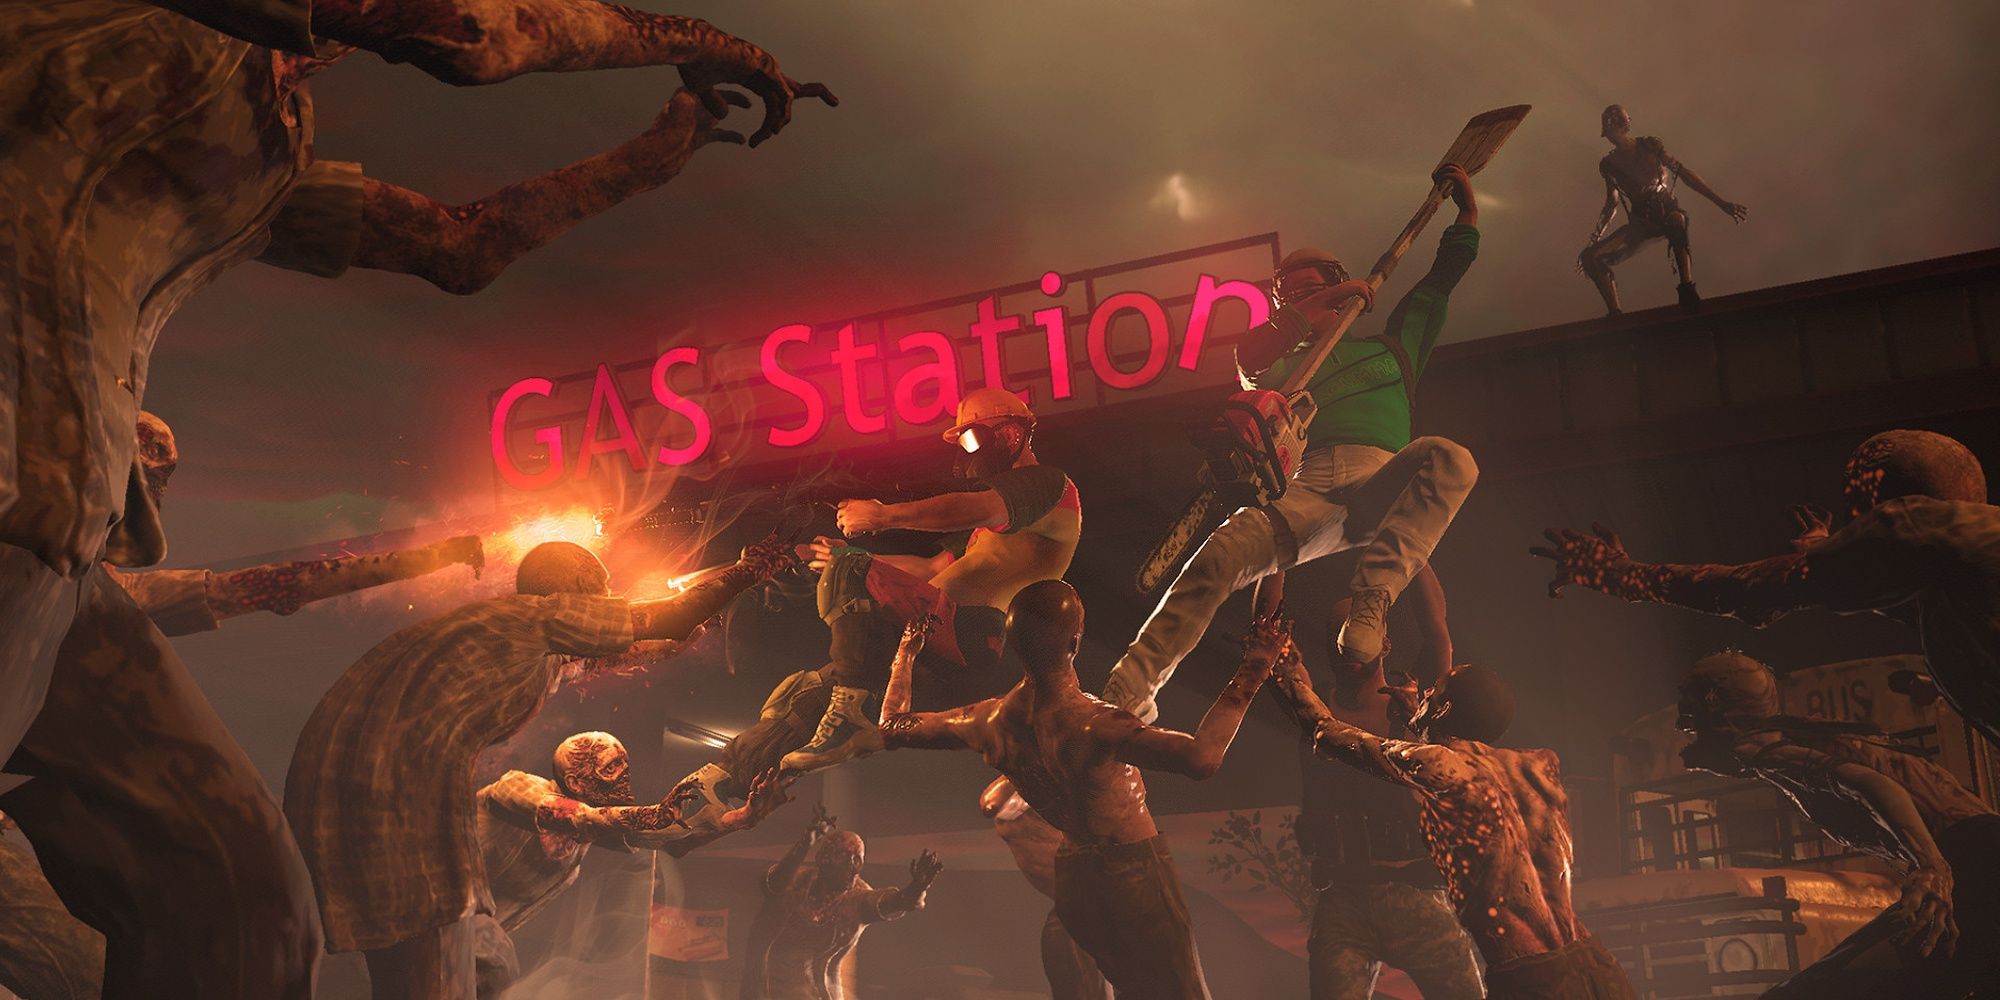 Requisition VR: Survivors Combating The Horde From A Van